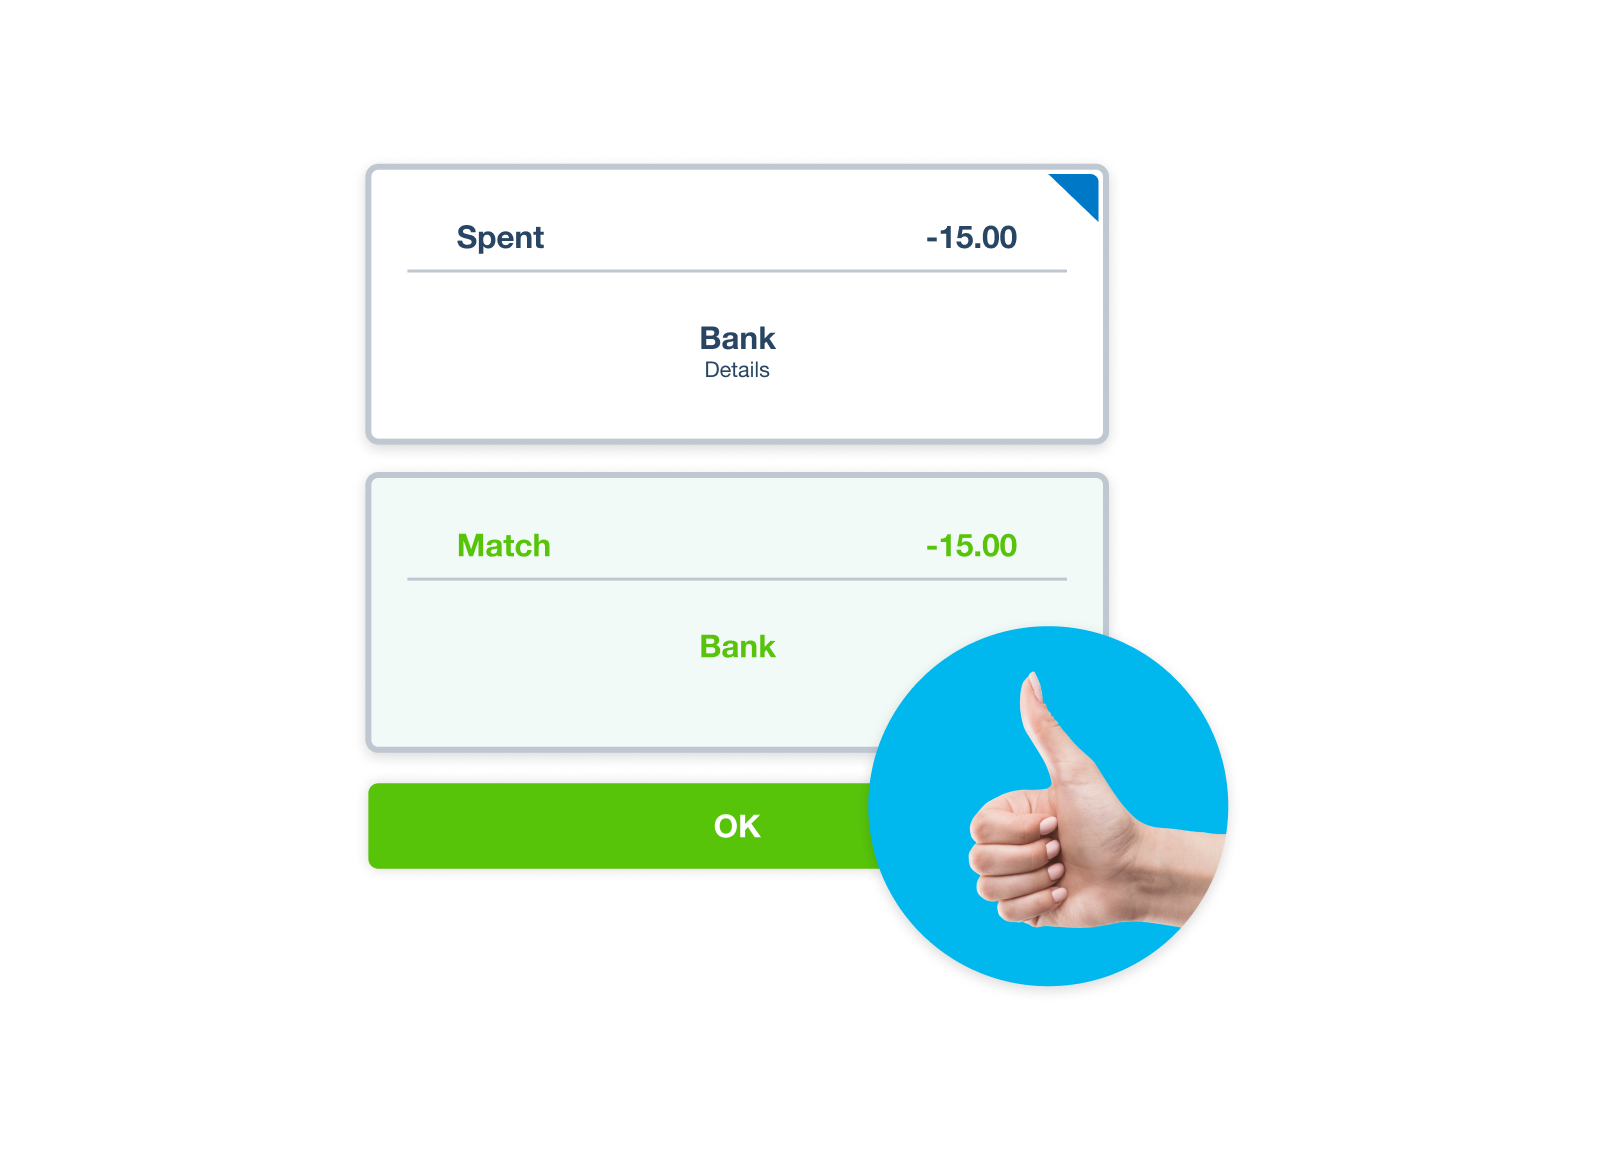 Illustration of bank transactions being matched in the Xero accounting app.